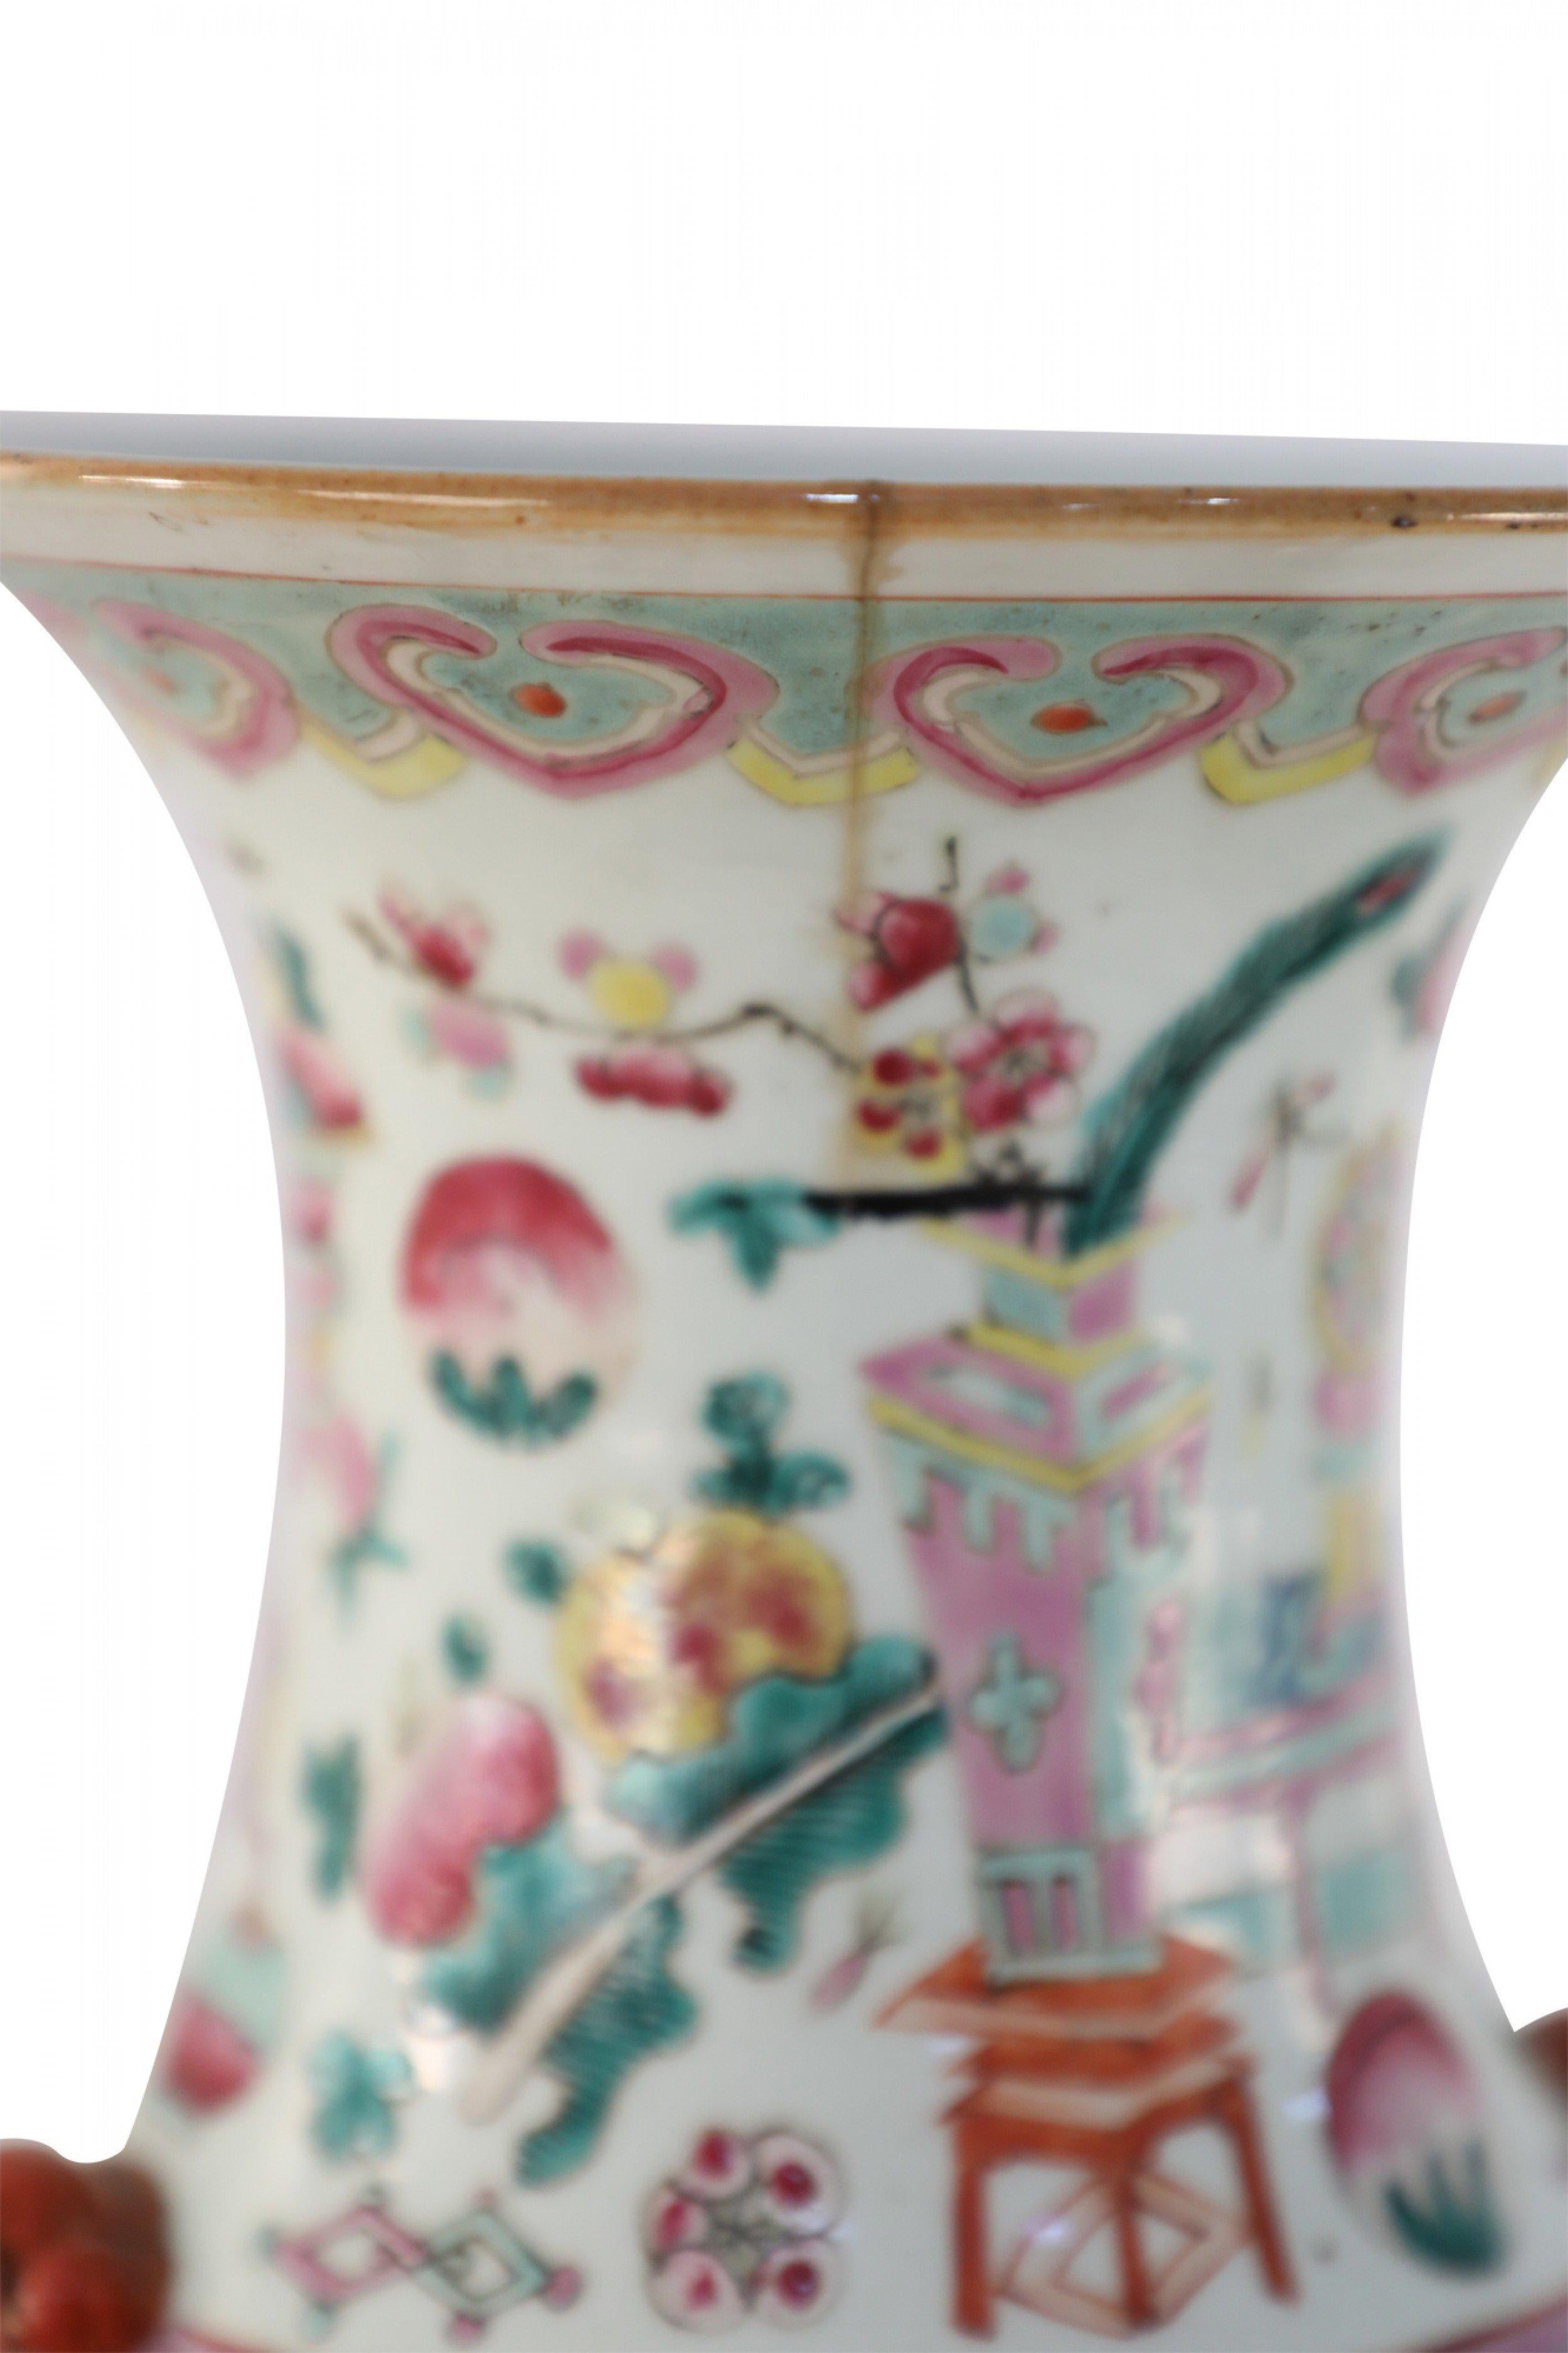 Pair of Chinese (Early 20th century) similar off-white lobed porcelain vases with red foo dog side ornaments and a pink and green traditional bogu pattern featuring bonsai, art objects, and calligraphy. (date mark on bottom) (Priced as Pair).
  